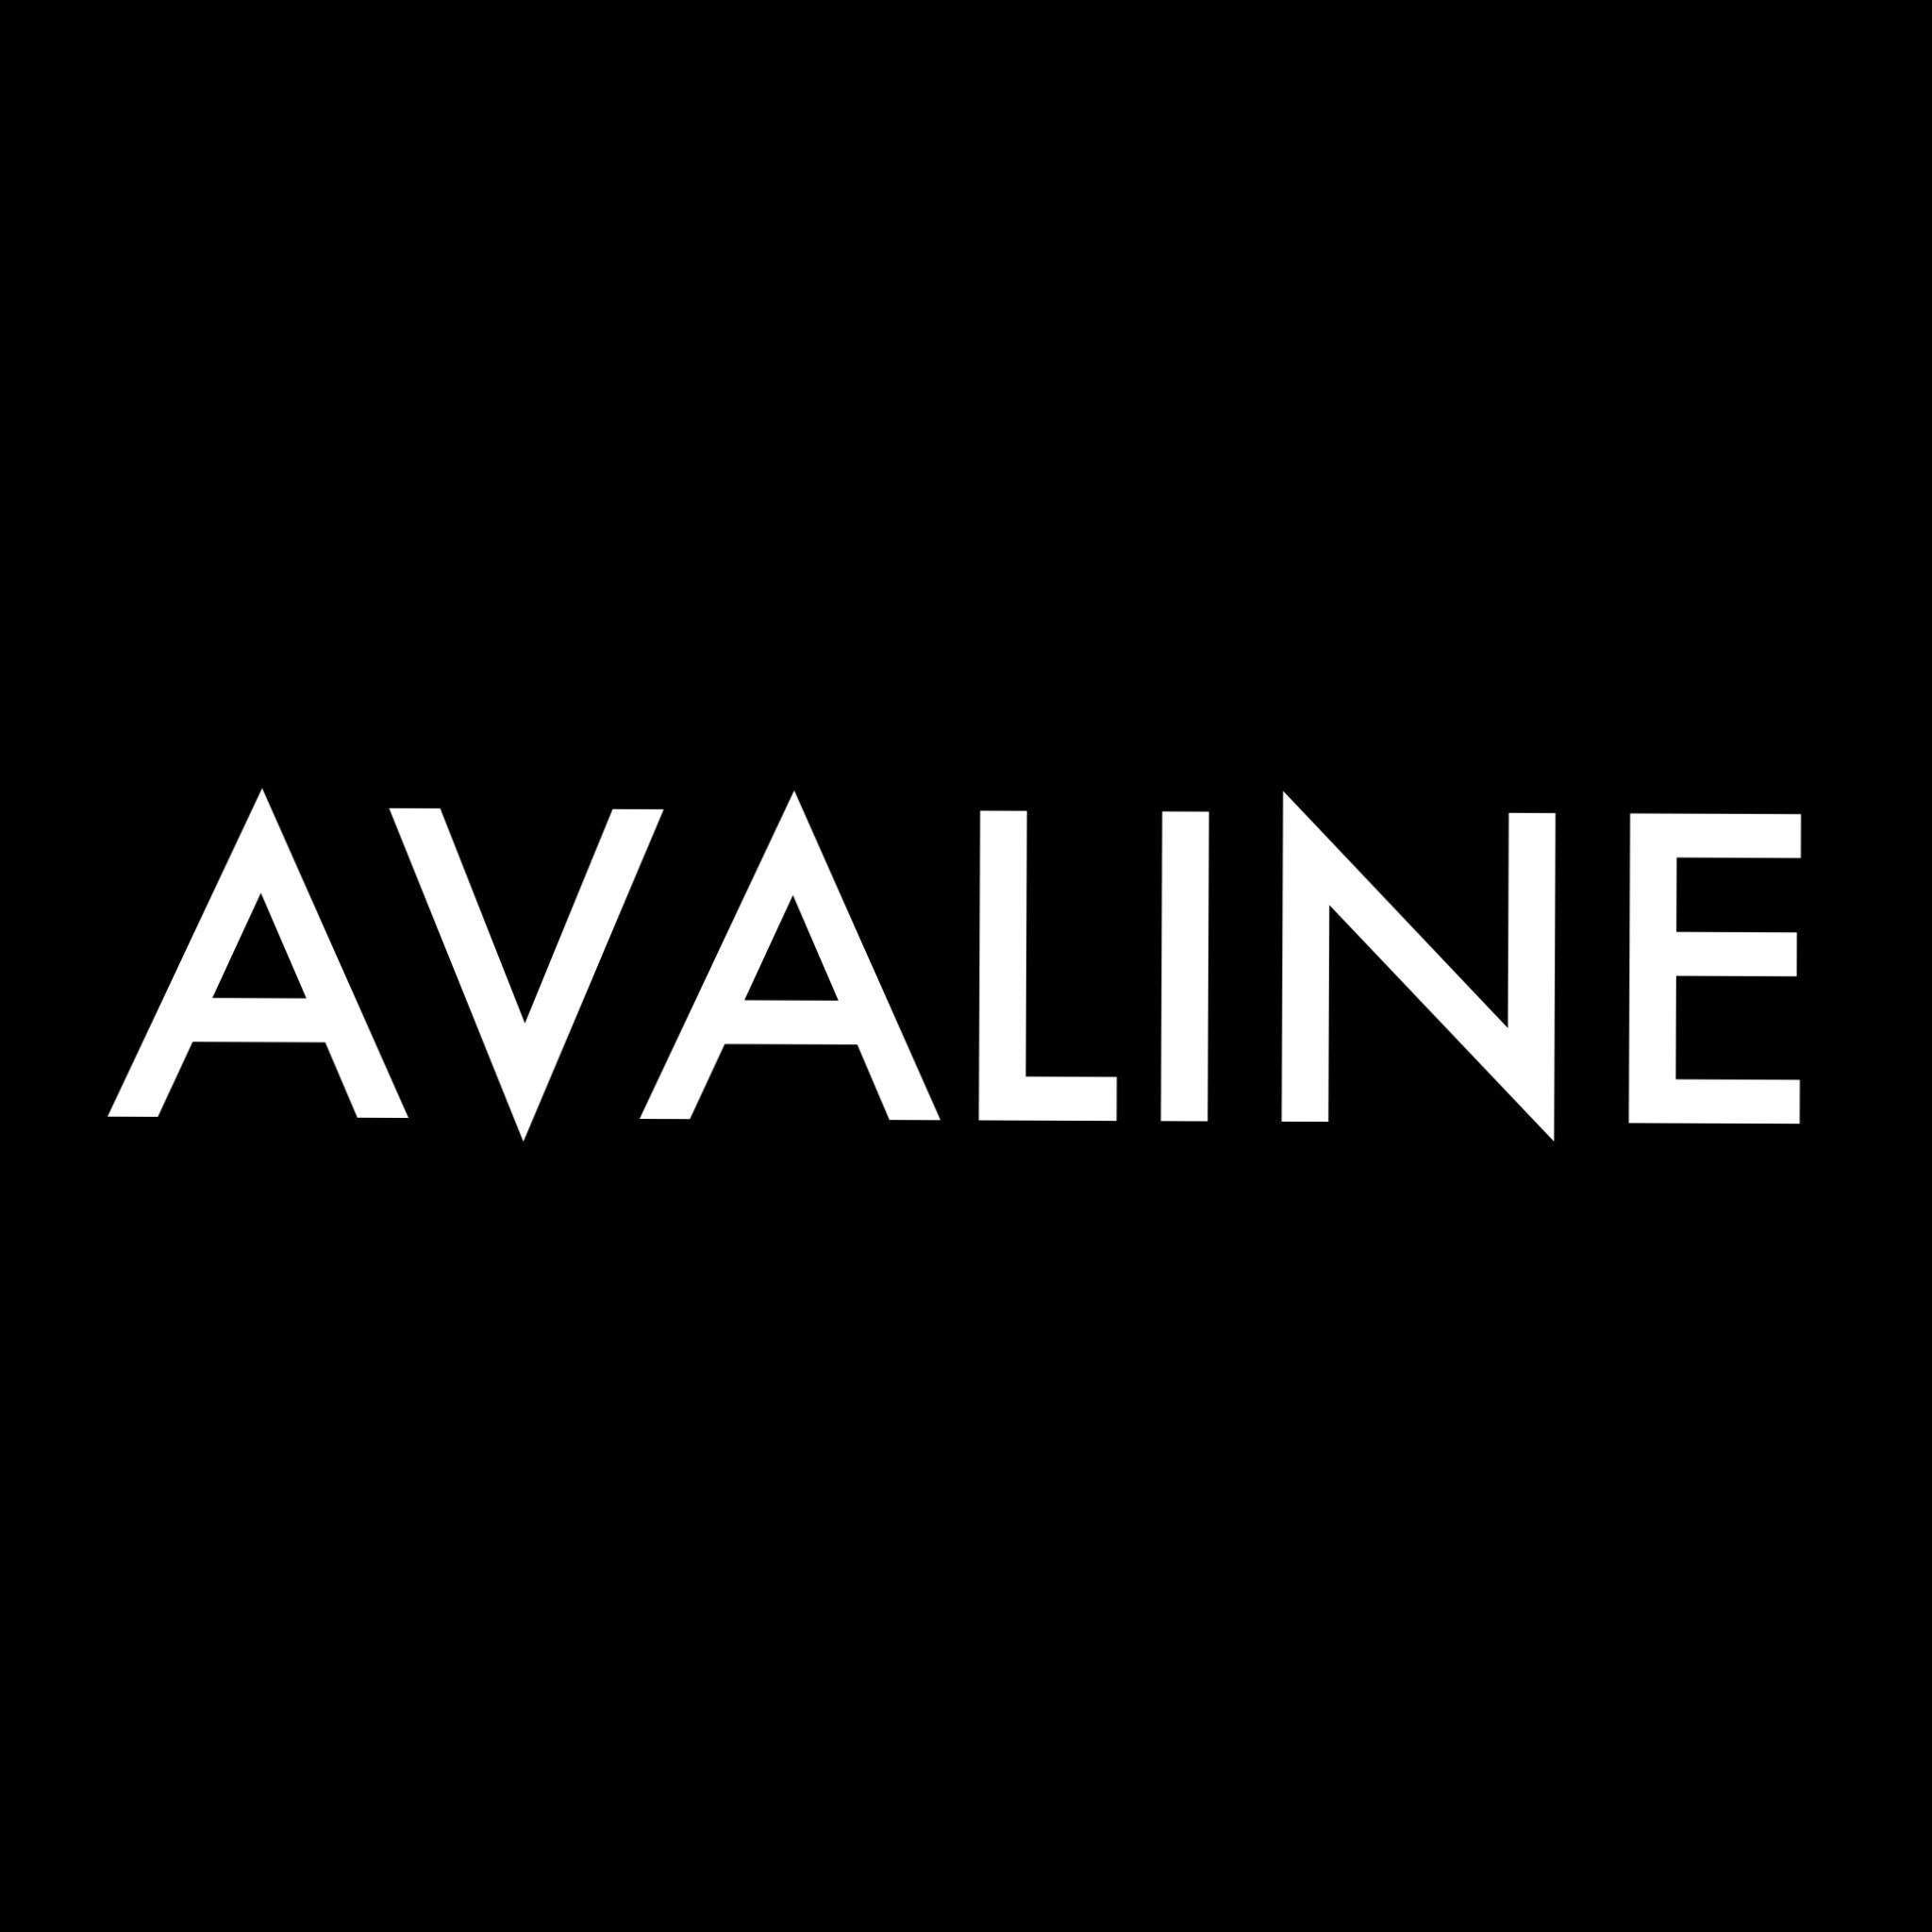 Avaline Shoes & bags